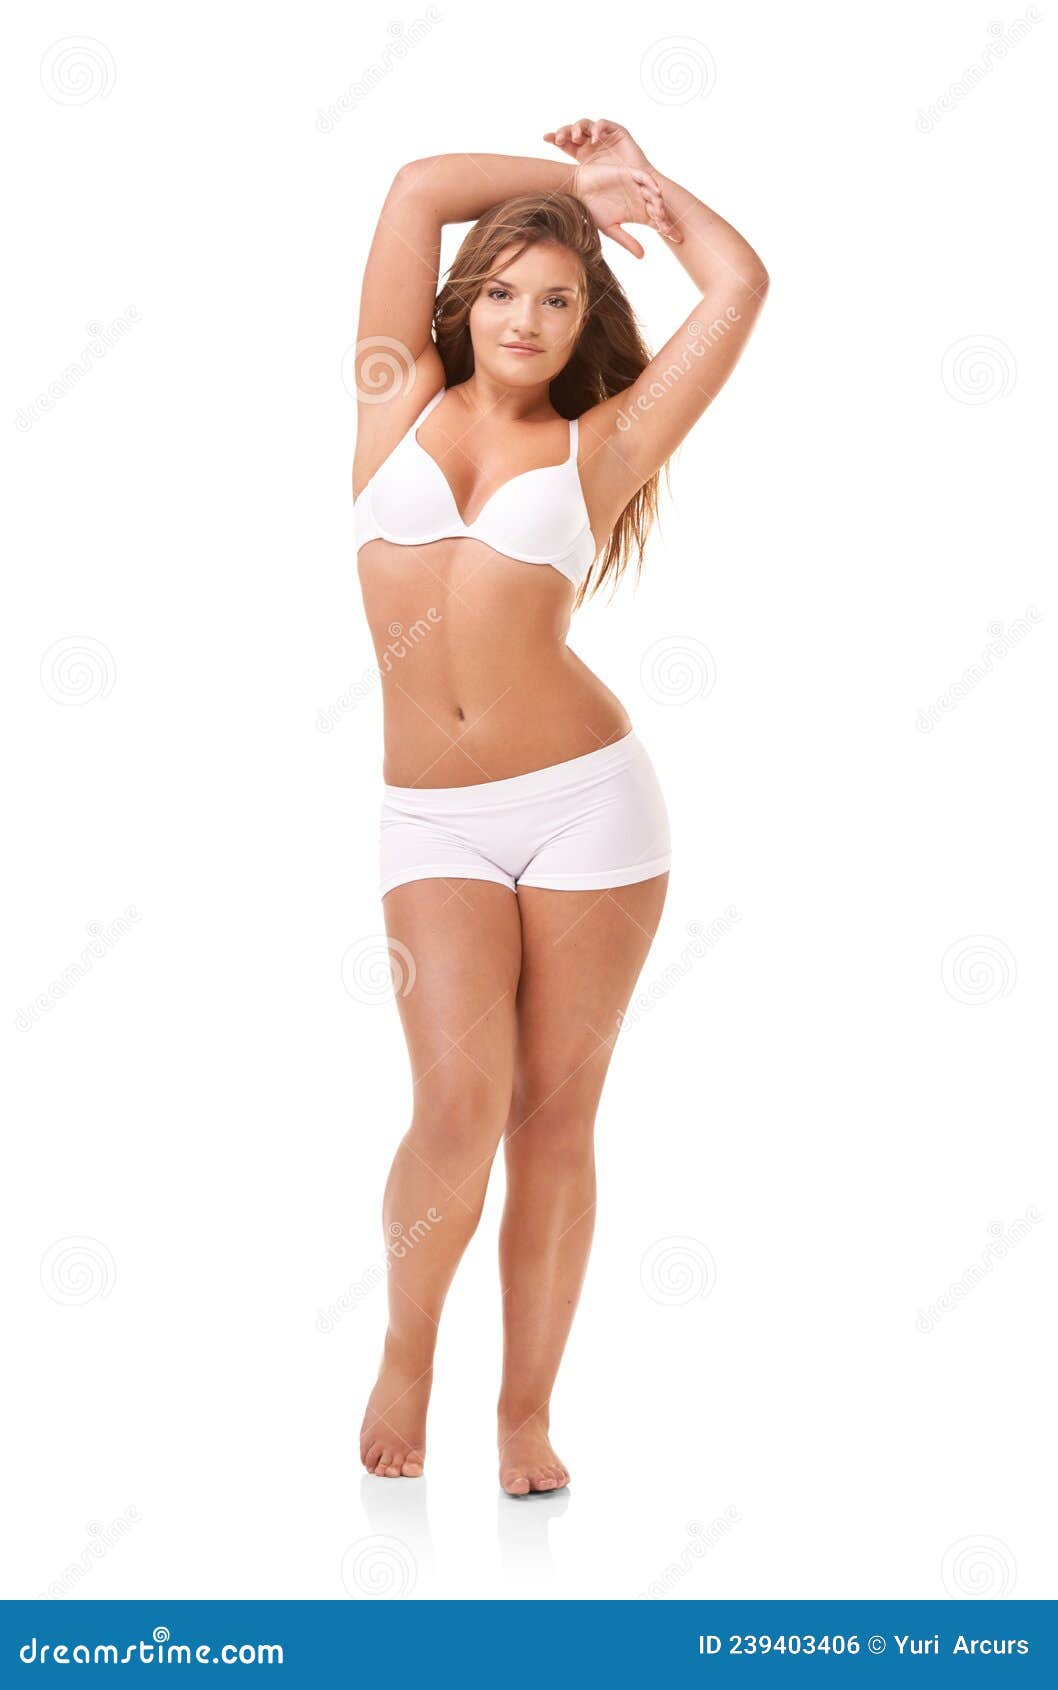 https://thumbs.dreamstime.com/z/full-length-portrait-confident-young-woman-posing-her-underwear-her-confidence-all-natural-full-length-portrait-239403406.jpg